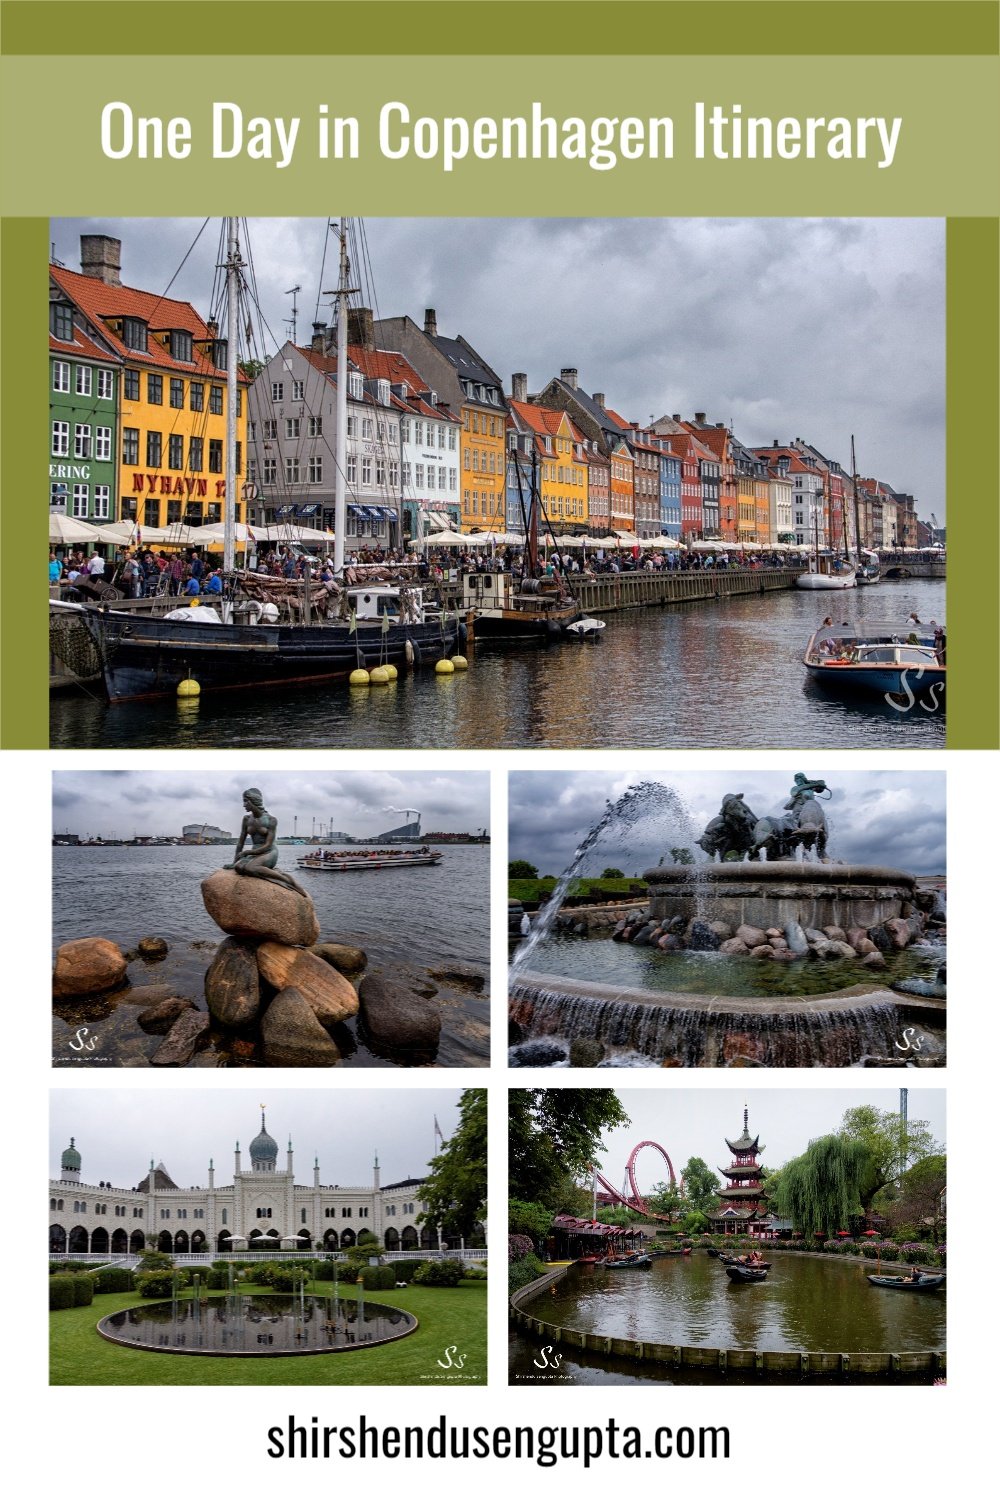 Nat sted Bekostning Manners One Day in Copenhagen Itinerary | 11 Best Places to Visit and Things to Do  in Copenhagen in One Day | Top 11 Must See Tourist Attractions in Copenhagen  on a Day